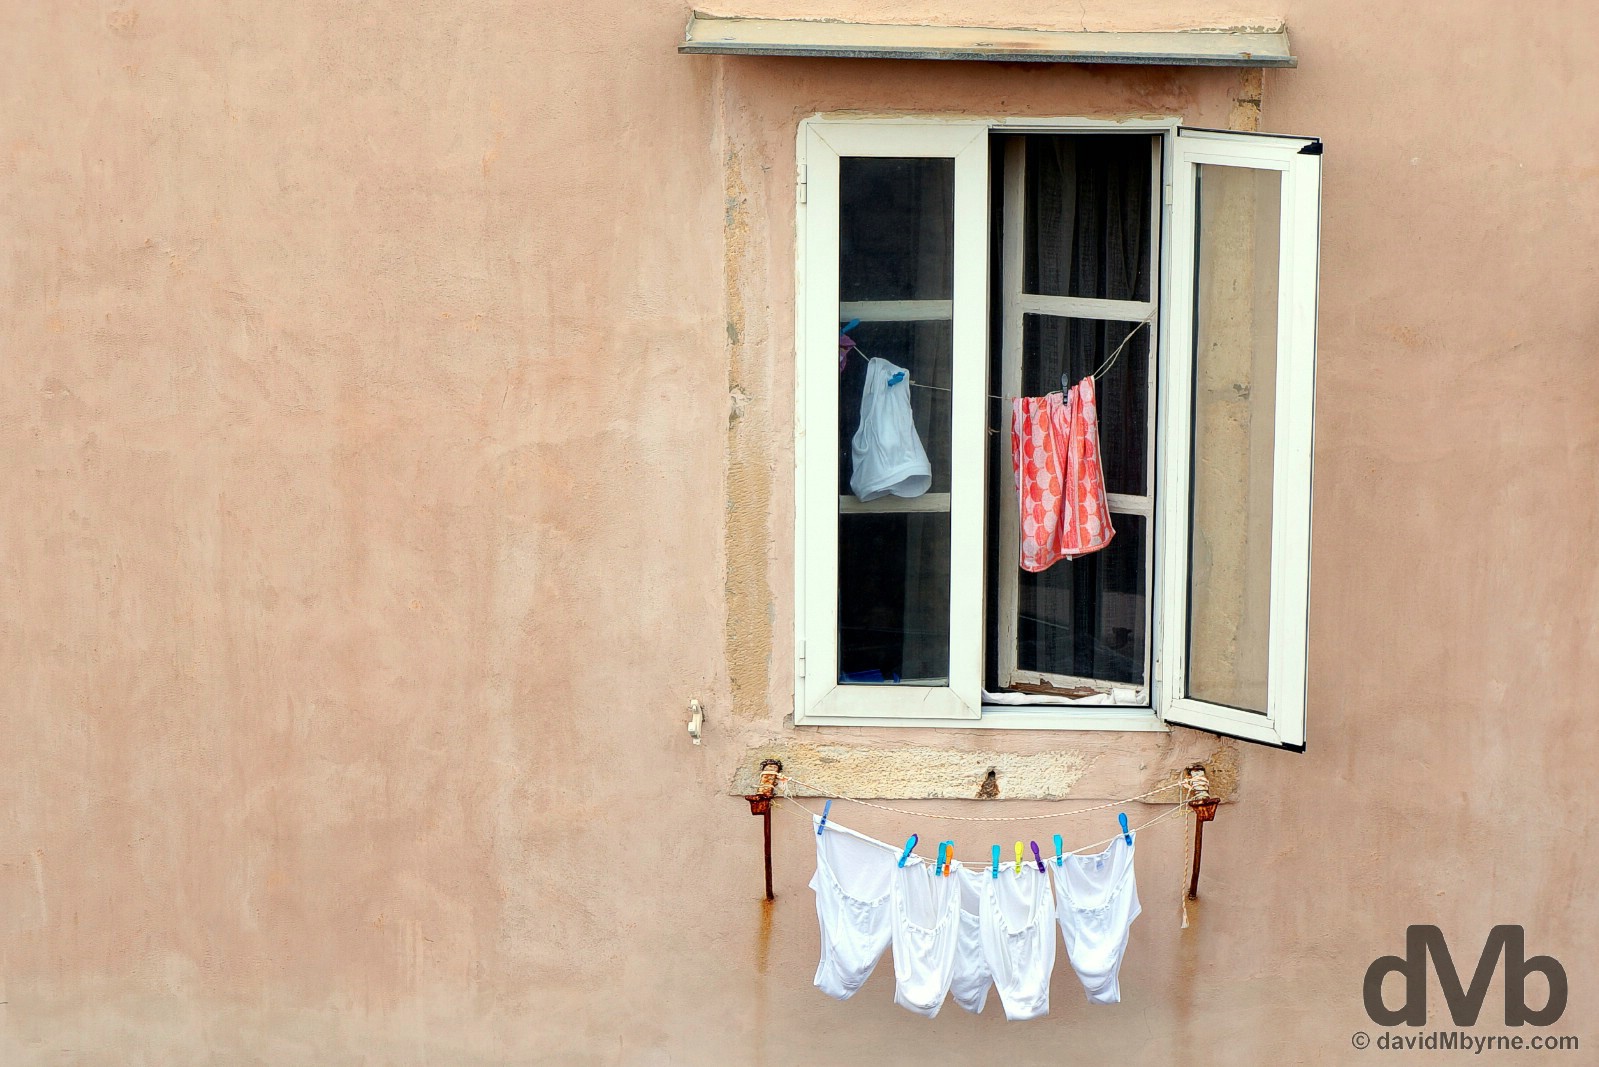 Laundry in the Old Town of Dubrovnik, Croatia. April 7, 2015.